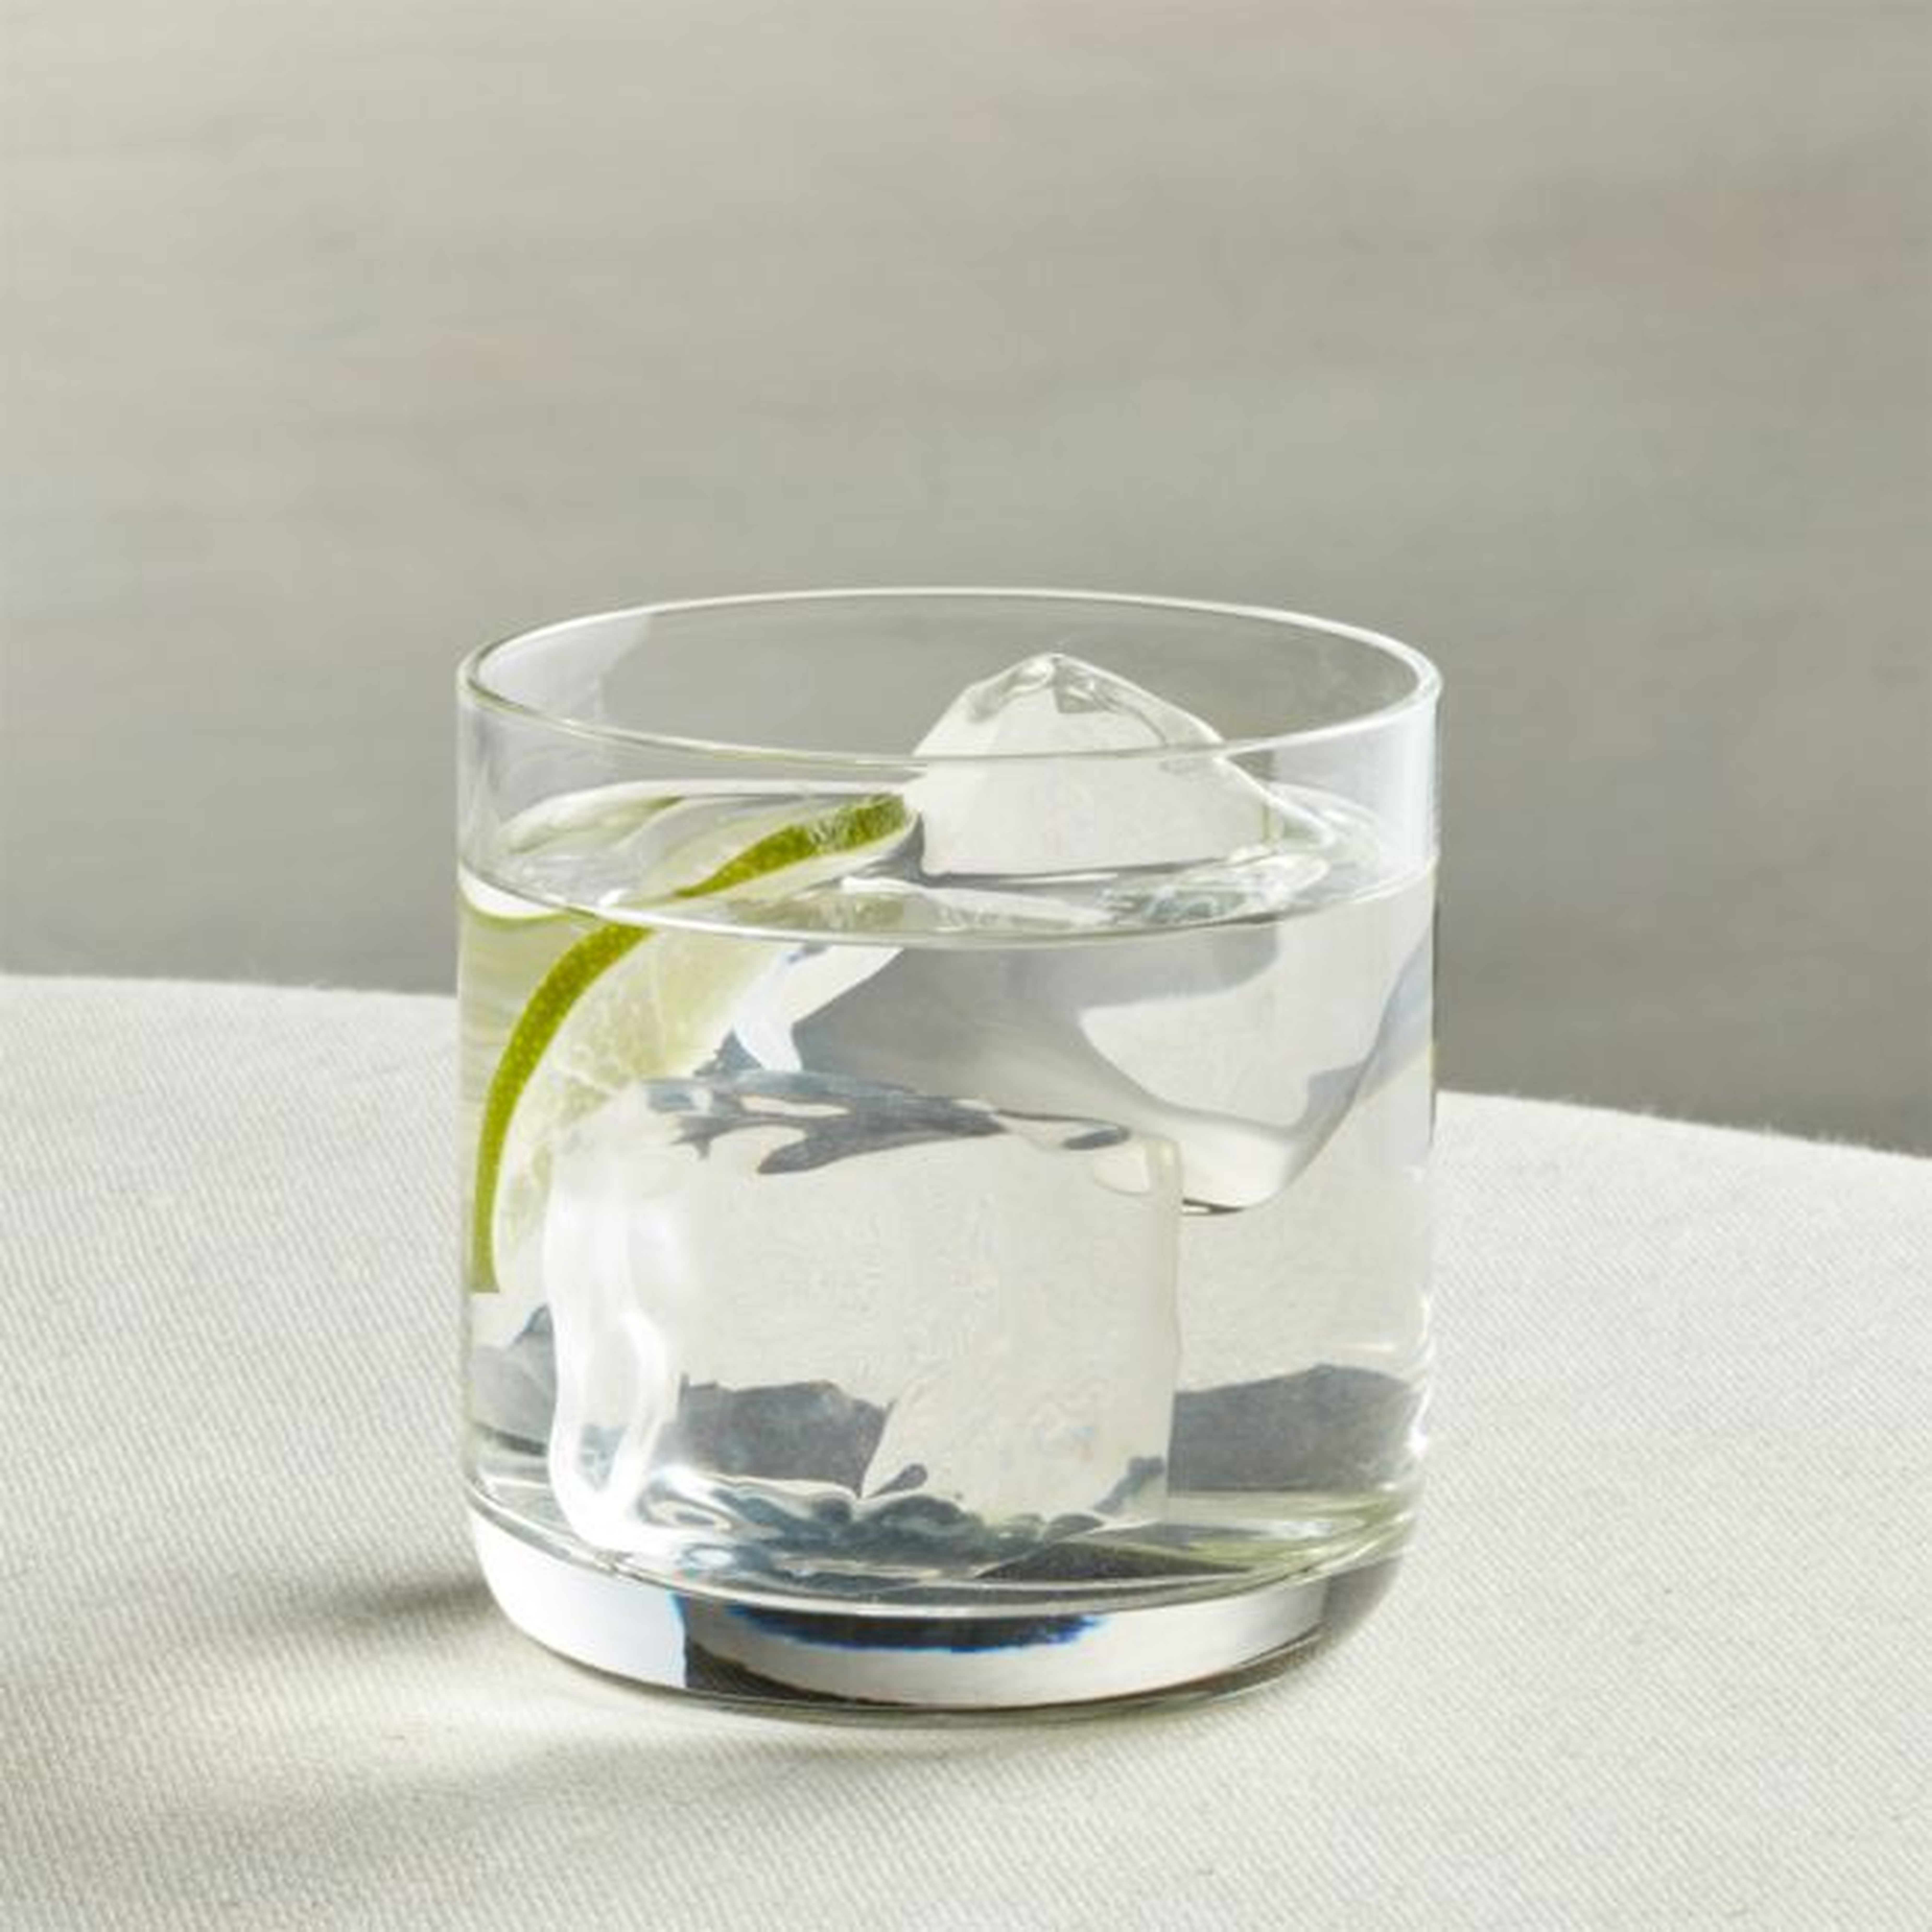 Crescent 10 oz. Double Old-Fashioned Glass - Crate and Barrel